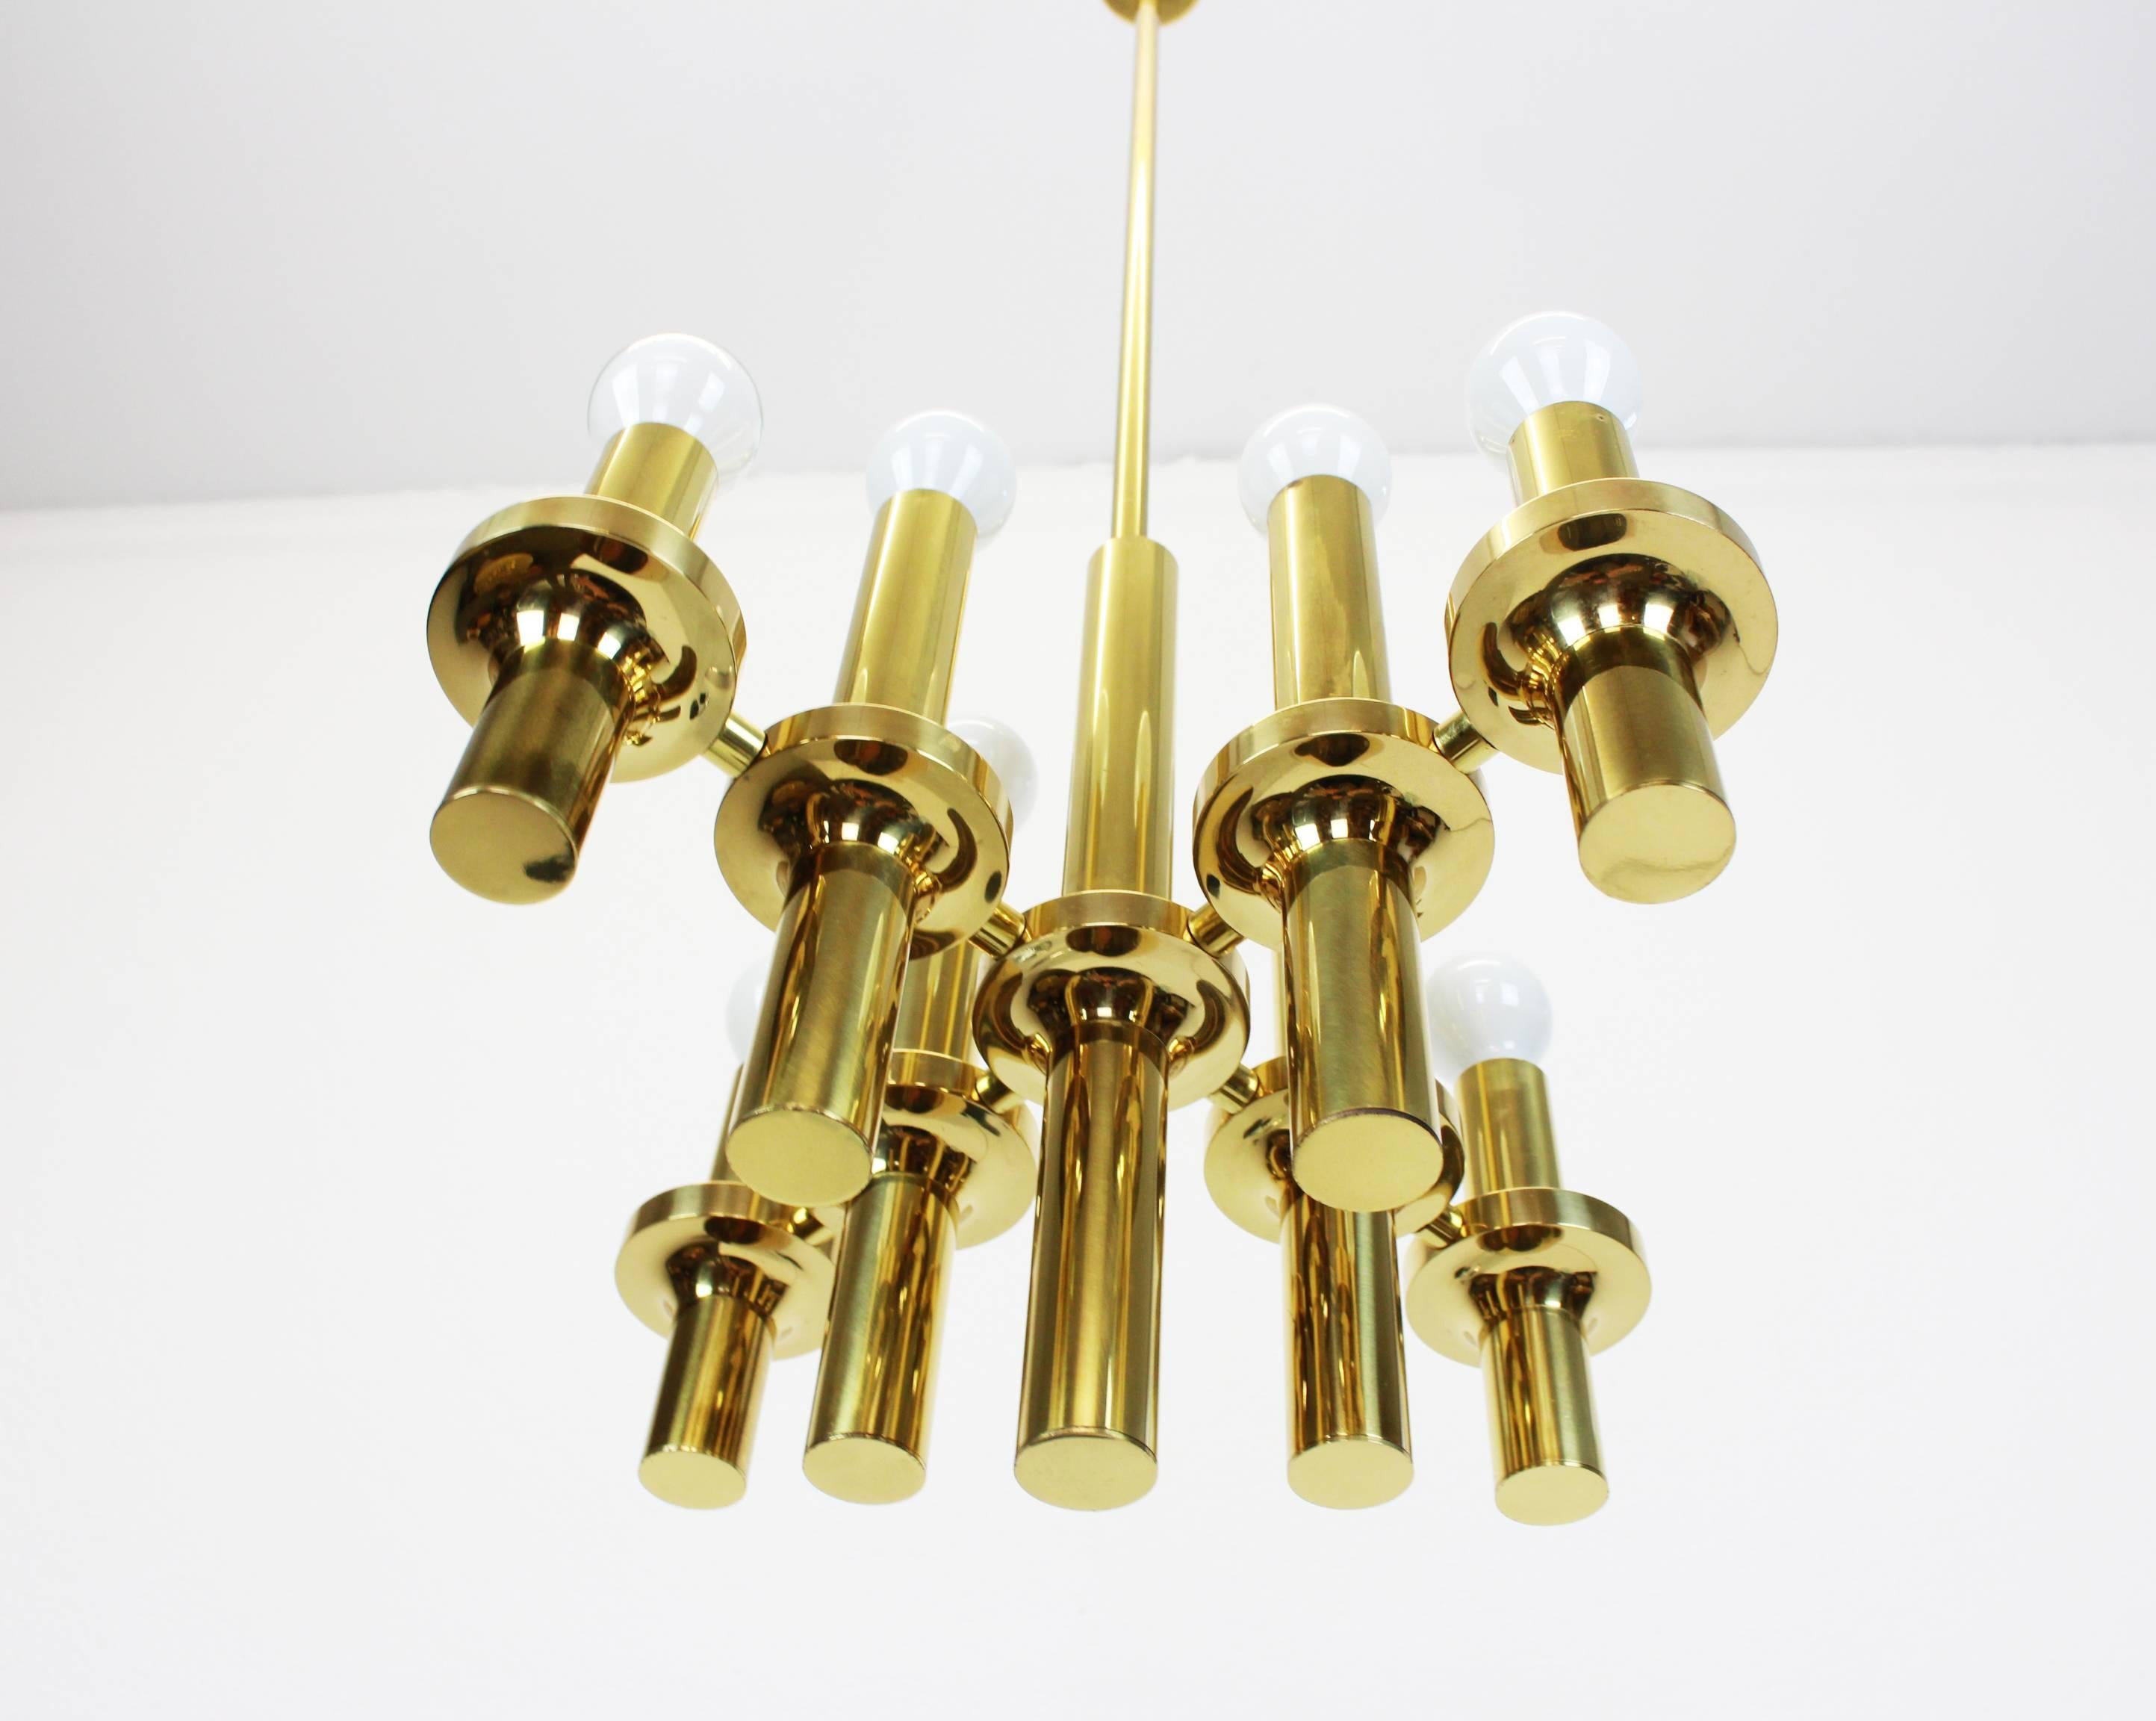 Wonderful Mid-Century brass chandelier in the manner of Sciolari made by Staff Leuchten, manufactured in Germany, circa the 1970s.

High quality and in very good condition. Cleaned, well-wired and ready to use. 

The fixture requires 8 x E14